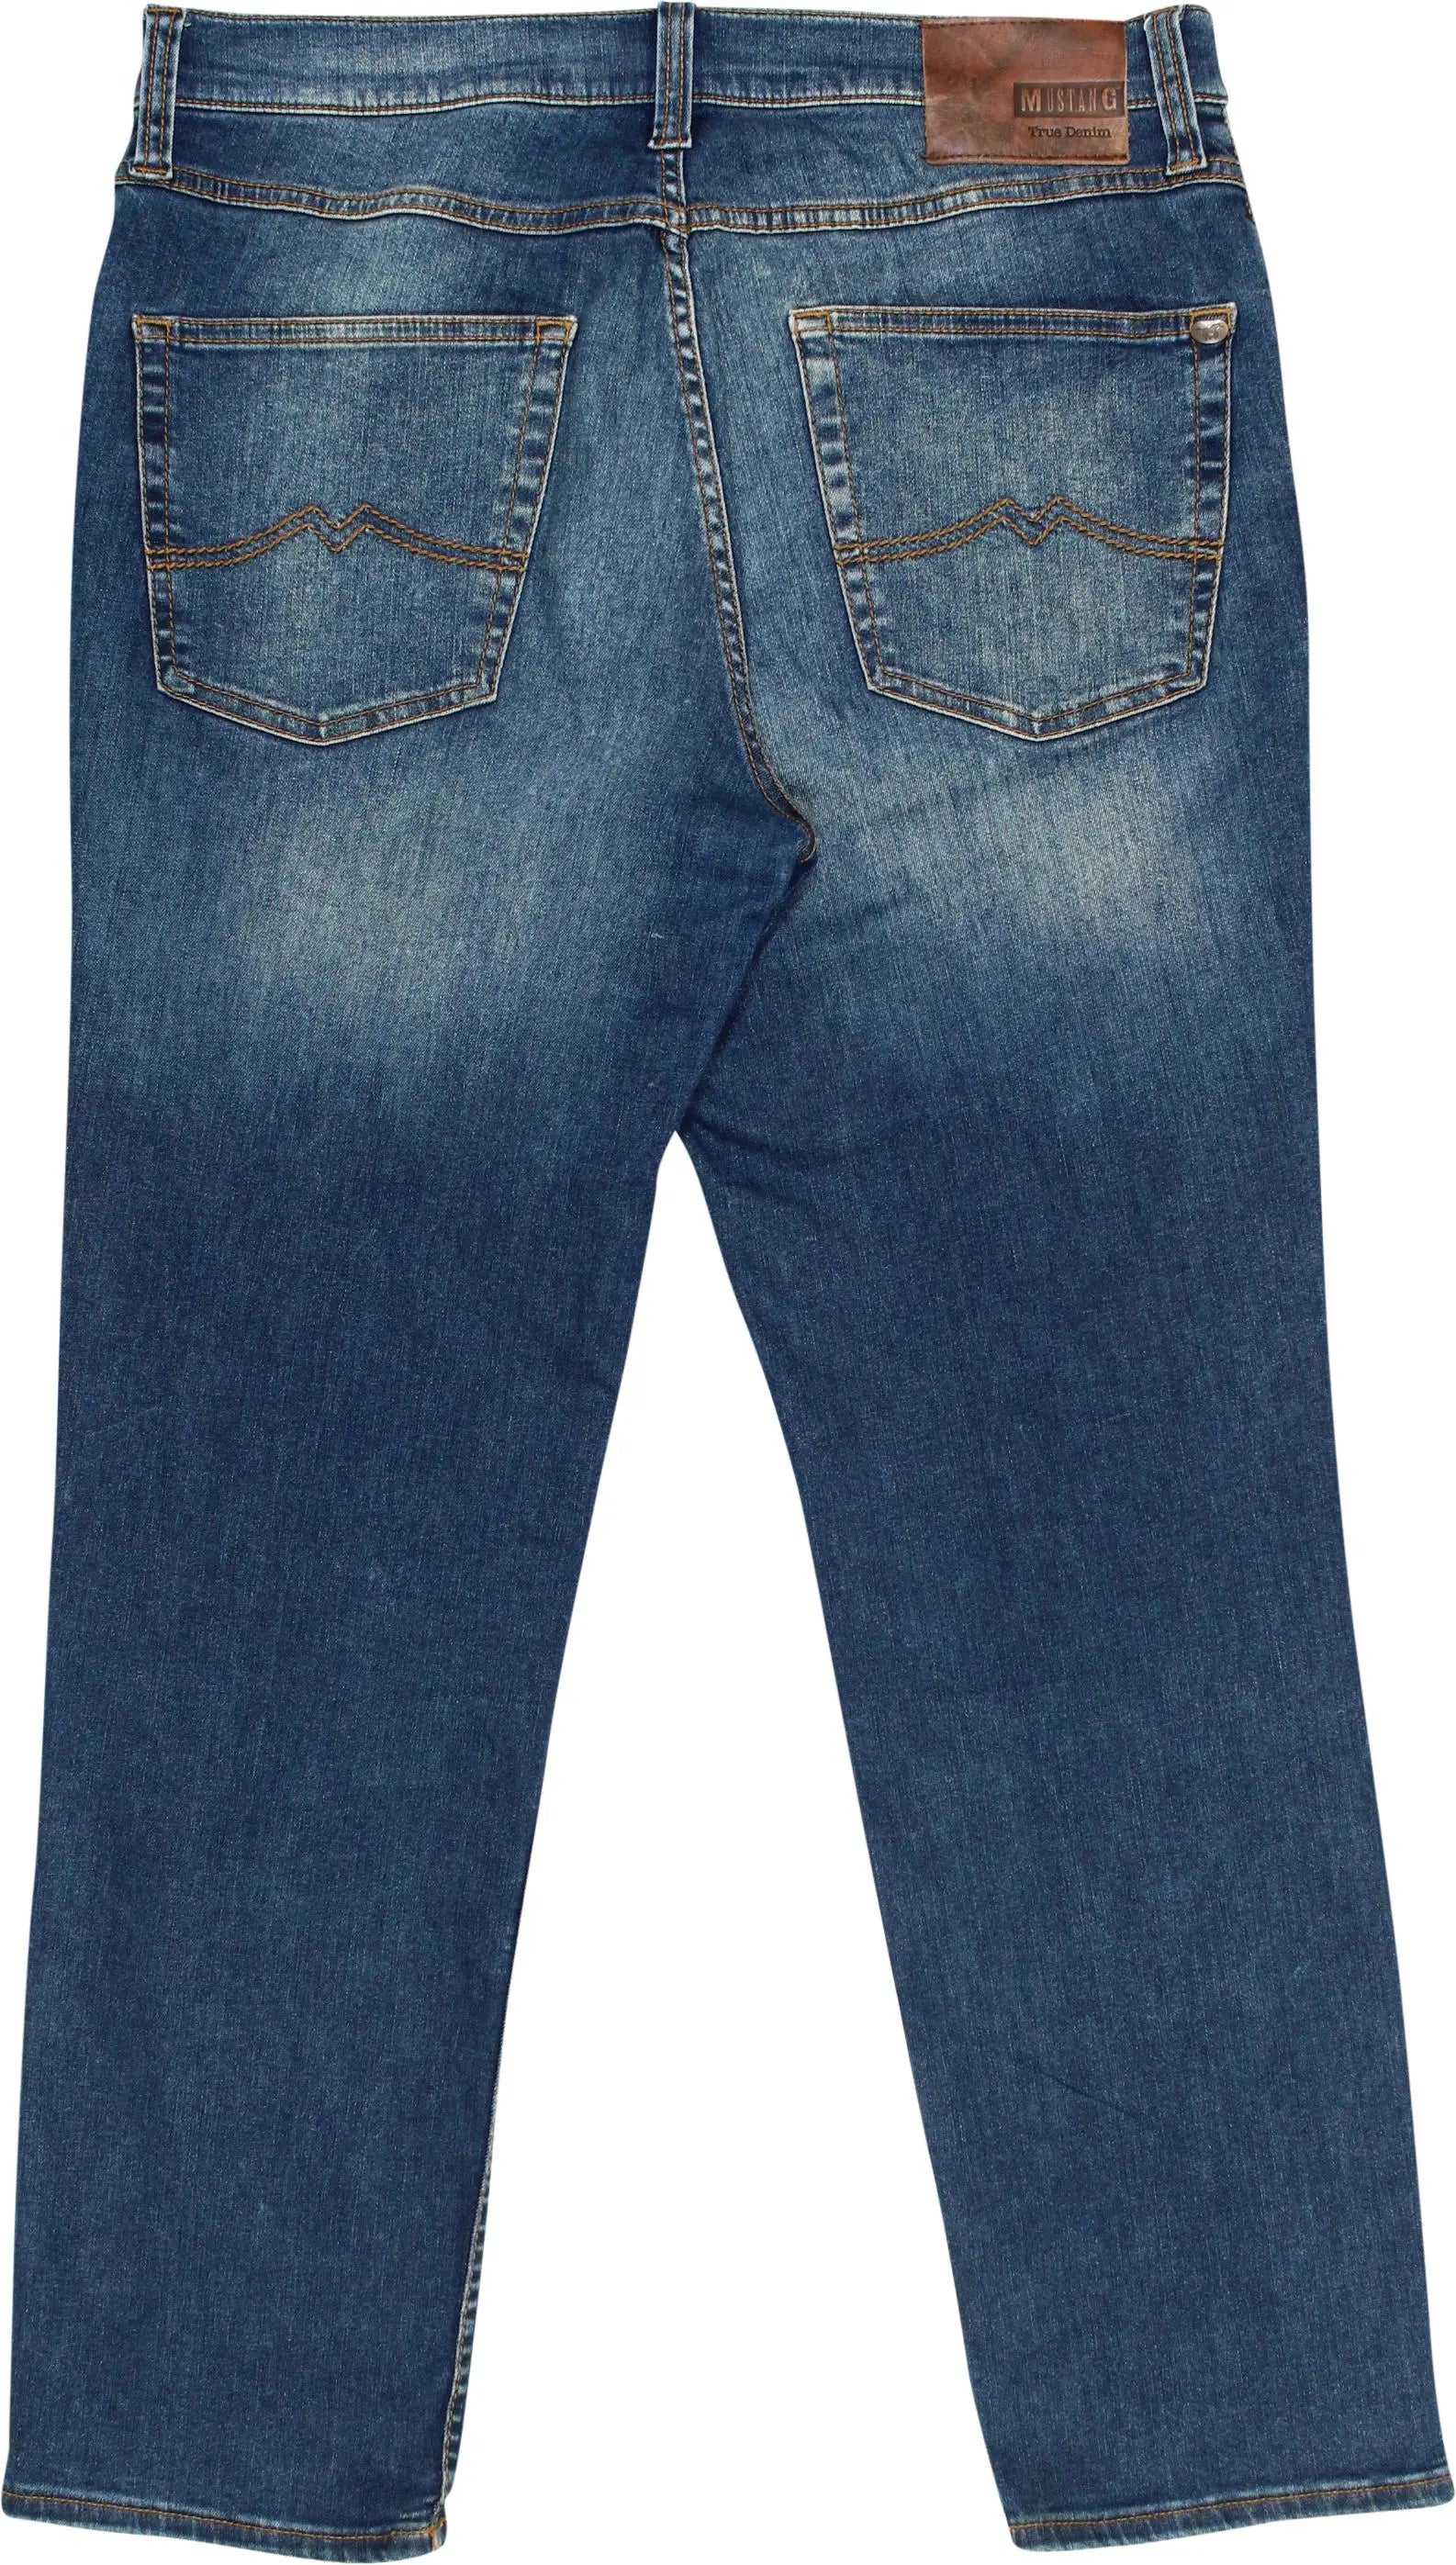 Mustang - Tapered Jeans by Mustang- ThriftTale.com - Vintage and second handclothing